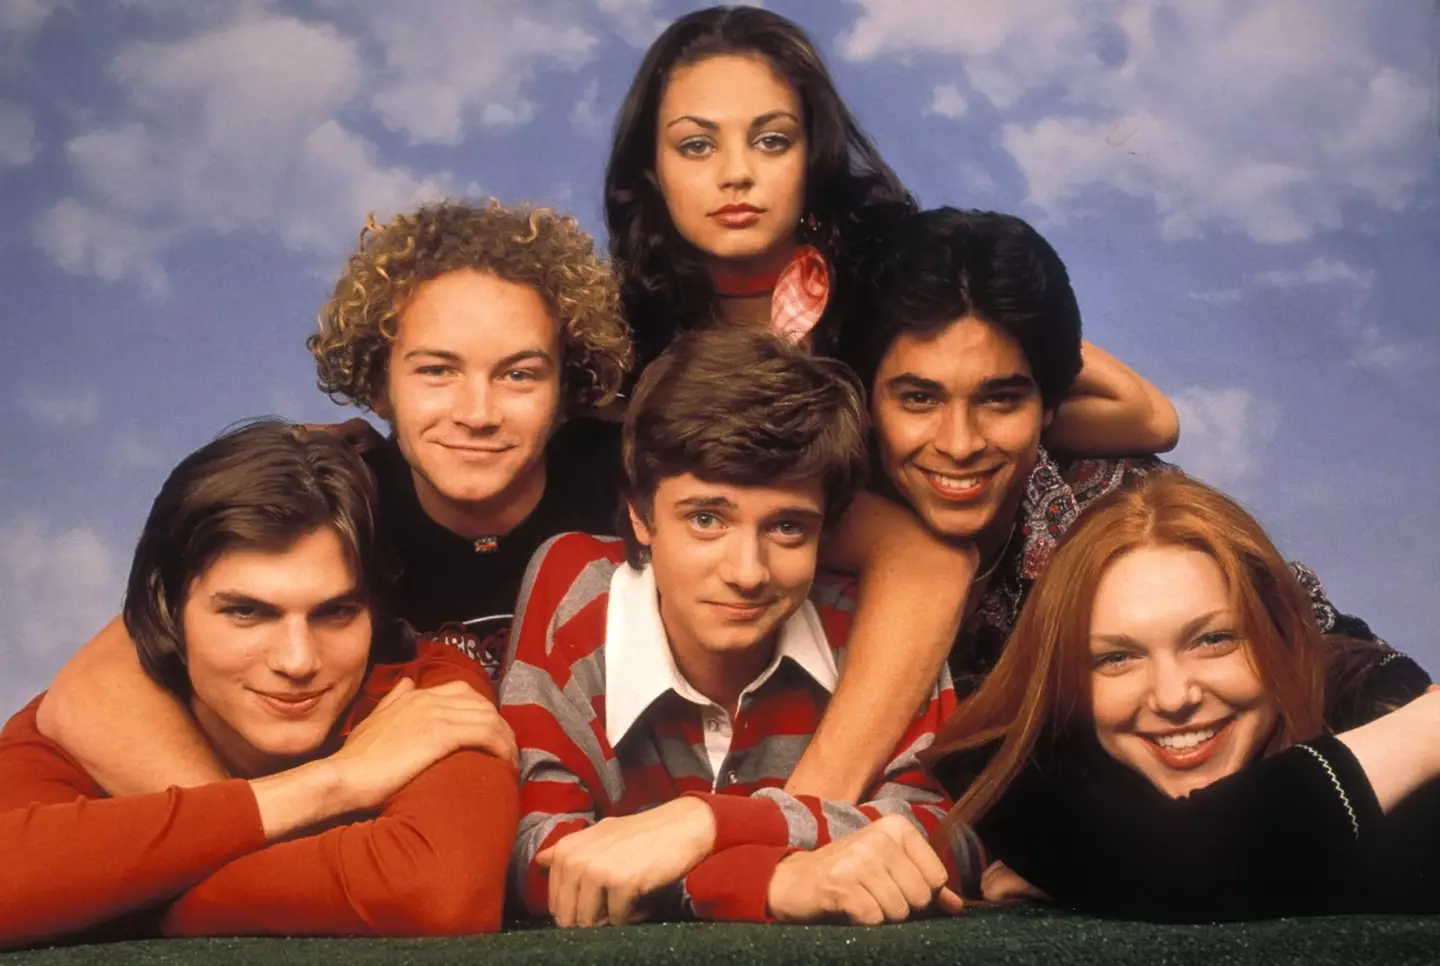 The cast of That '70s Show.